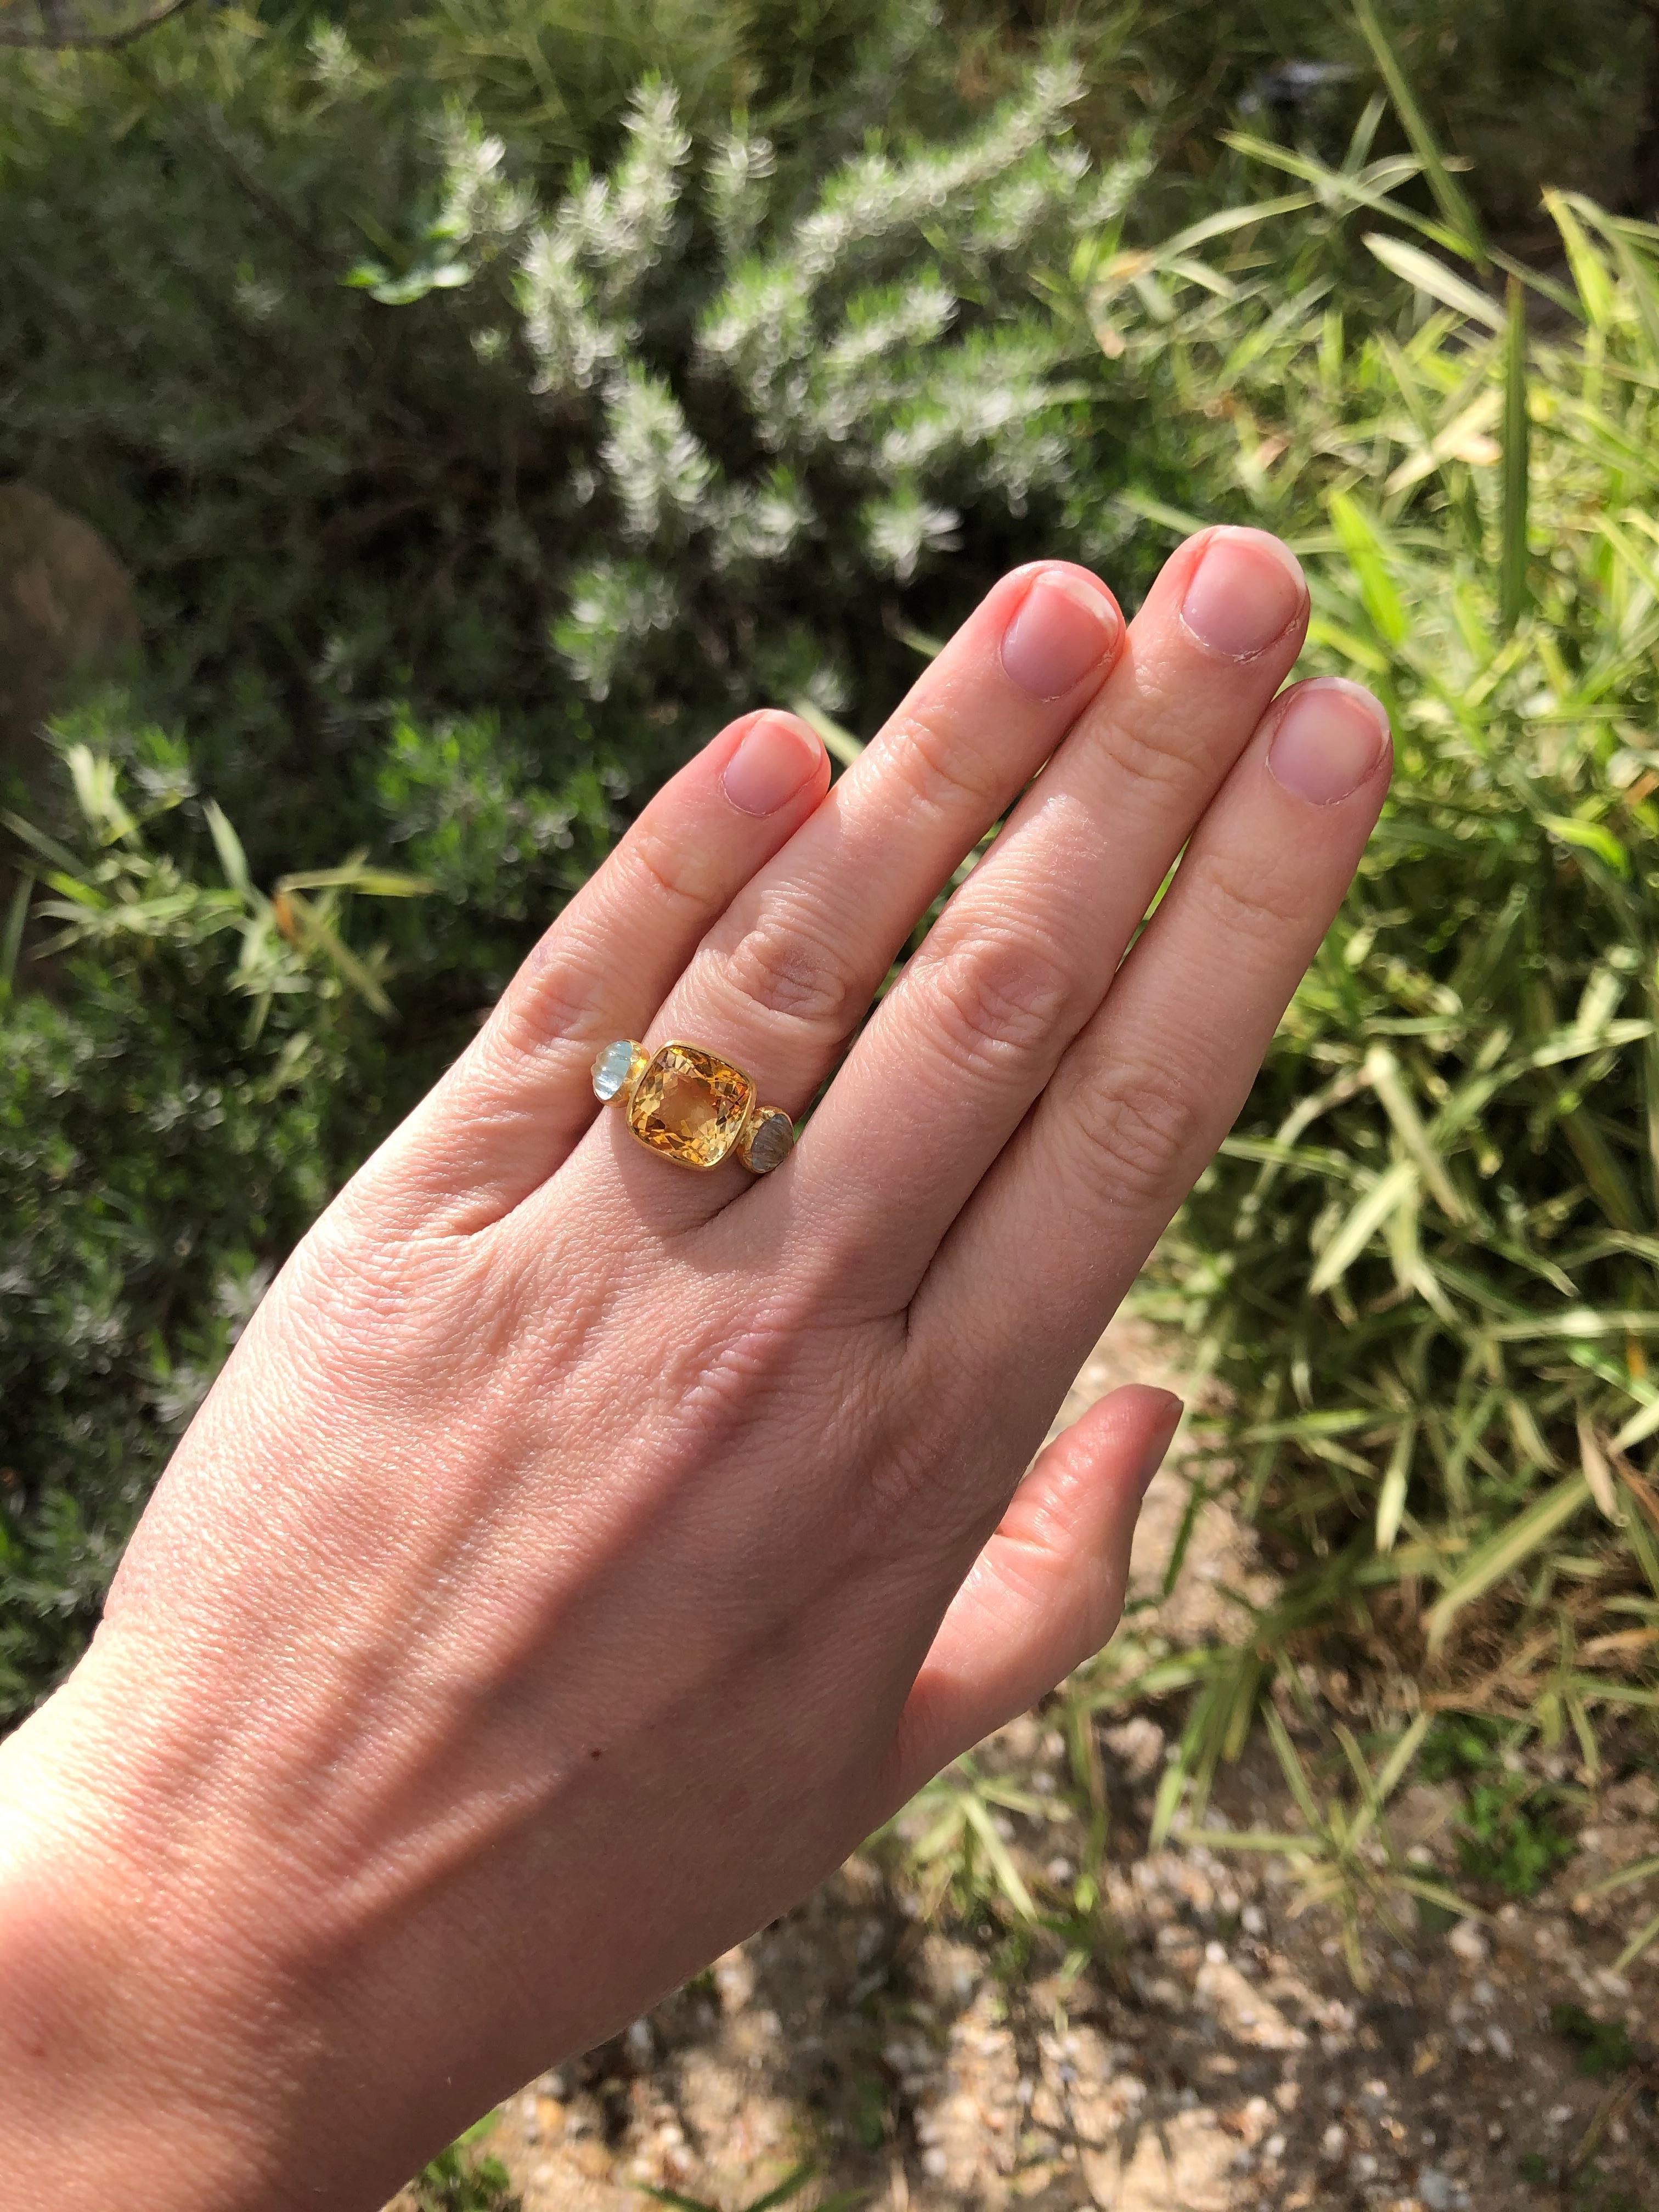 This delicate ring is composed of citrine facated of 4.53 cts surrounded by 2 aquamarines carved as shells (totale weight: 1.44cts). The stones show natural, typical and eye-visible inclusions. 

This one-of-a-kind ring is handmade with 22kt mat